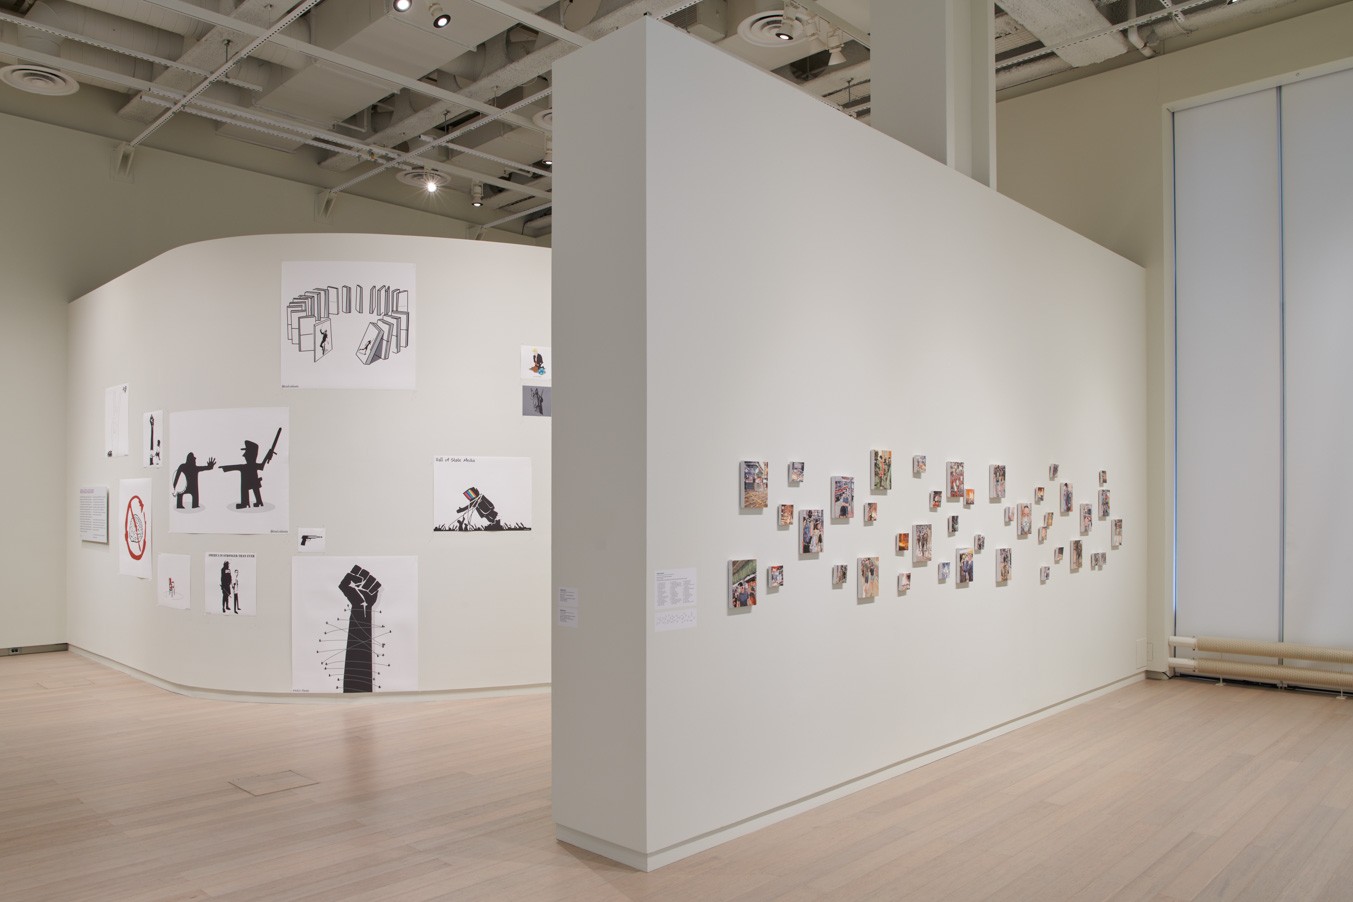 Installation view showing works by the artists Chow Chun Fai and Khalid Albaih from the exhibition “The Protest and The Recuperation” on view at the Wallach Art Gallery, Columbia University. Photograph by Kyle Knodell.